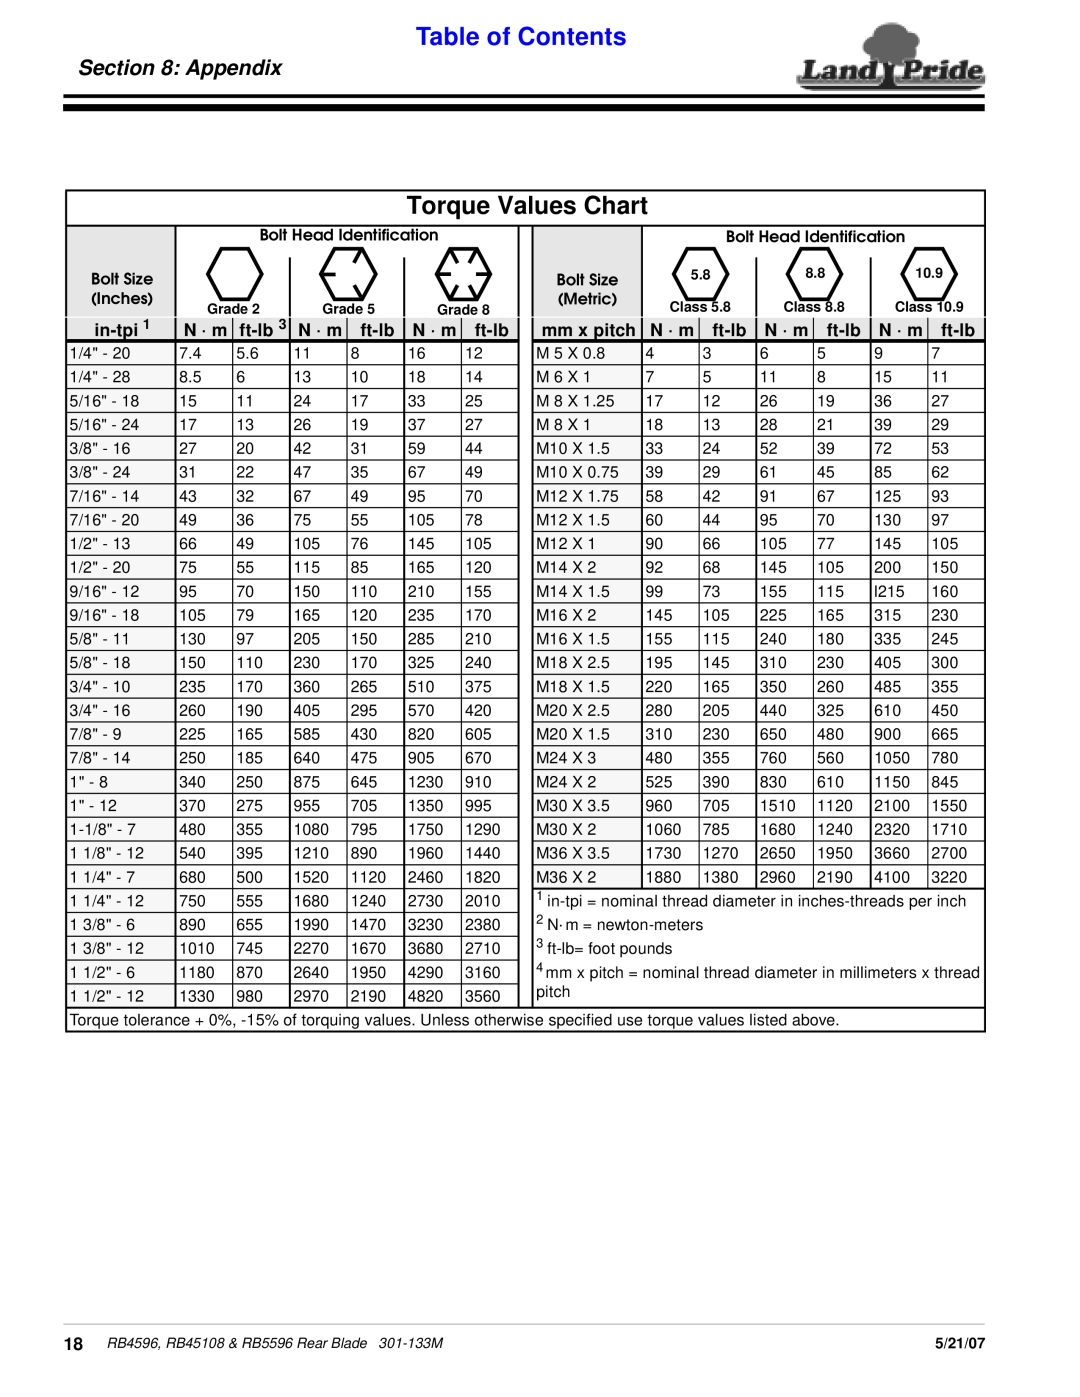 Land Pride RB45108, RB5596, RB4596 manual Torque Values Chart, Appendix, in-tpi, N · m, ft-lb, mm x pitch, Table of Contents 